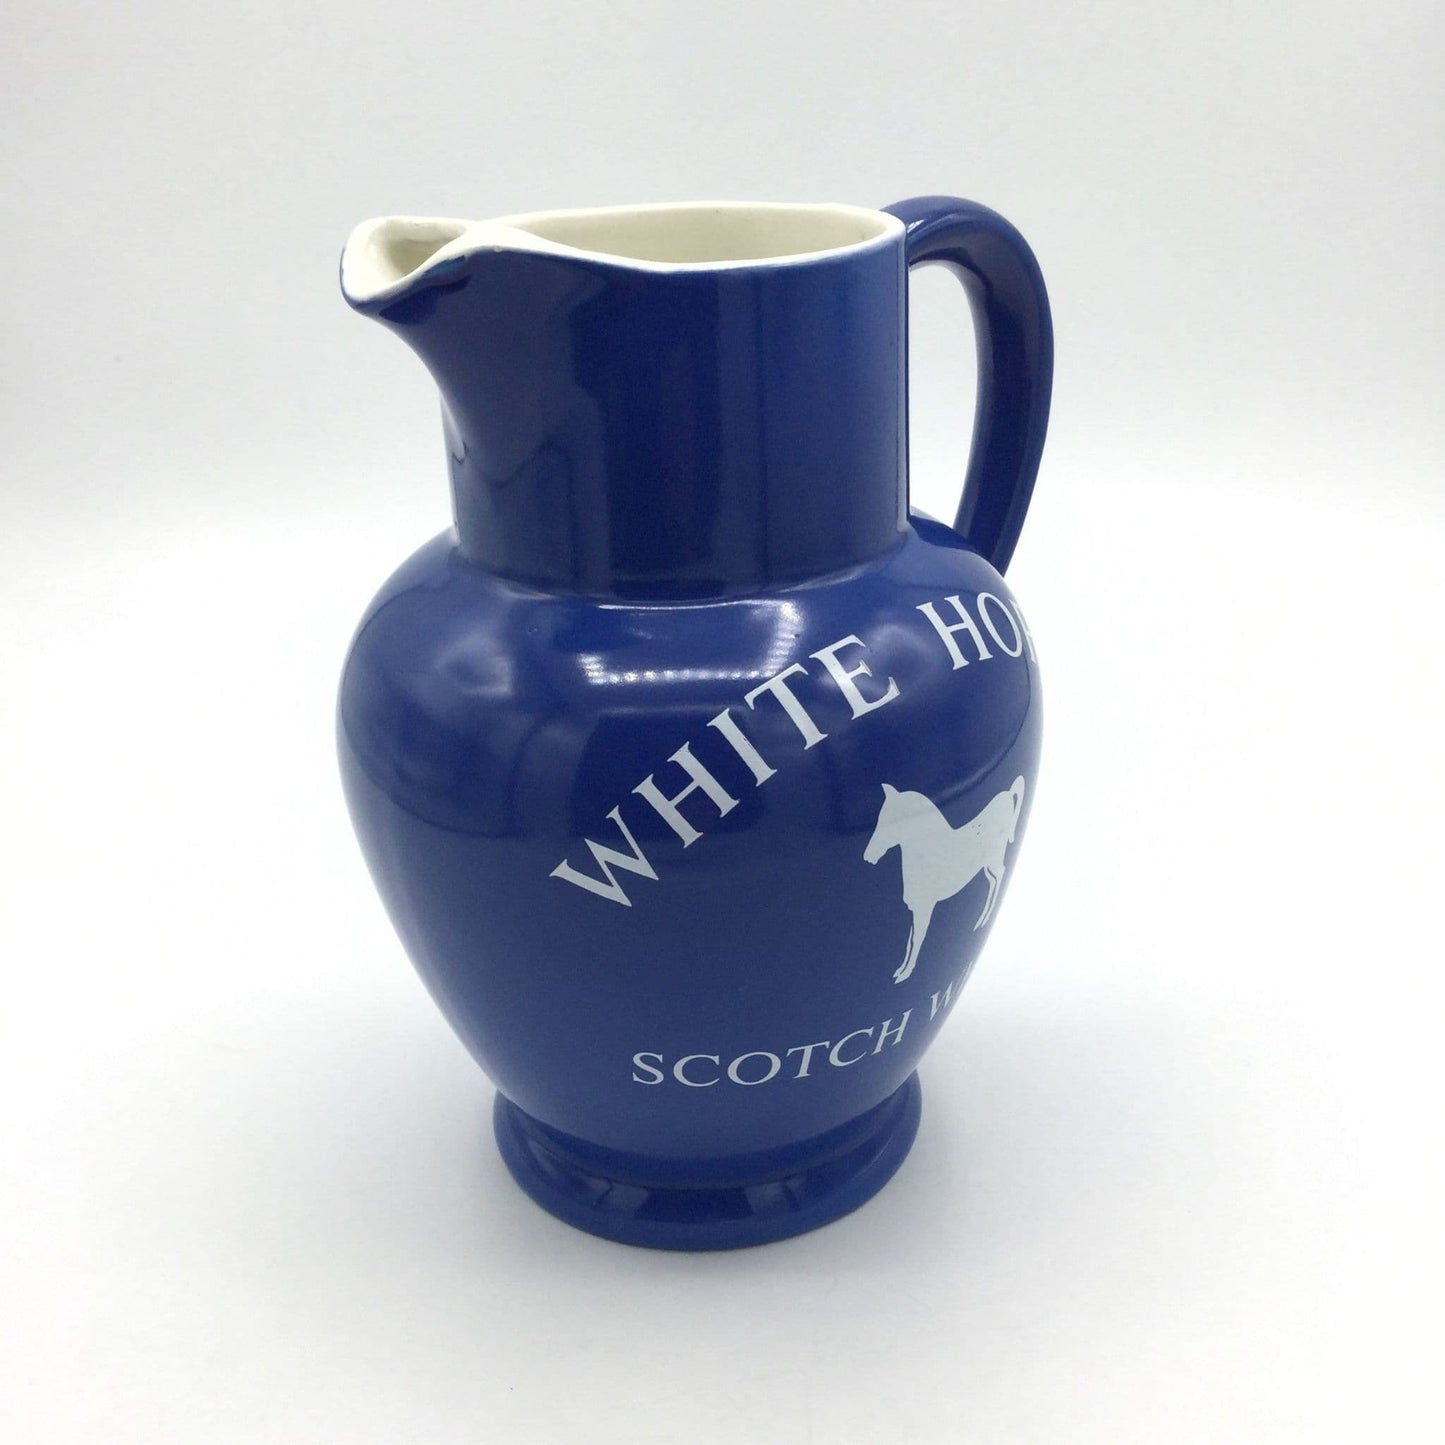 Vintage 1950s White Horse Scotch Whisky Water Jug